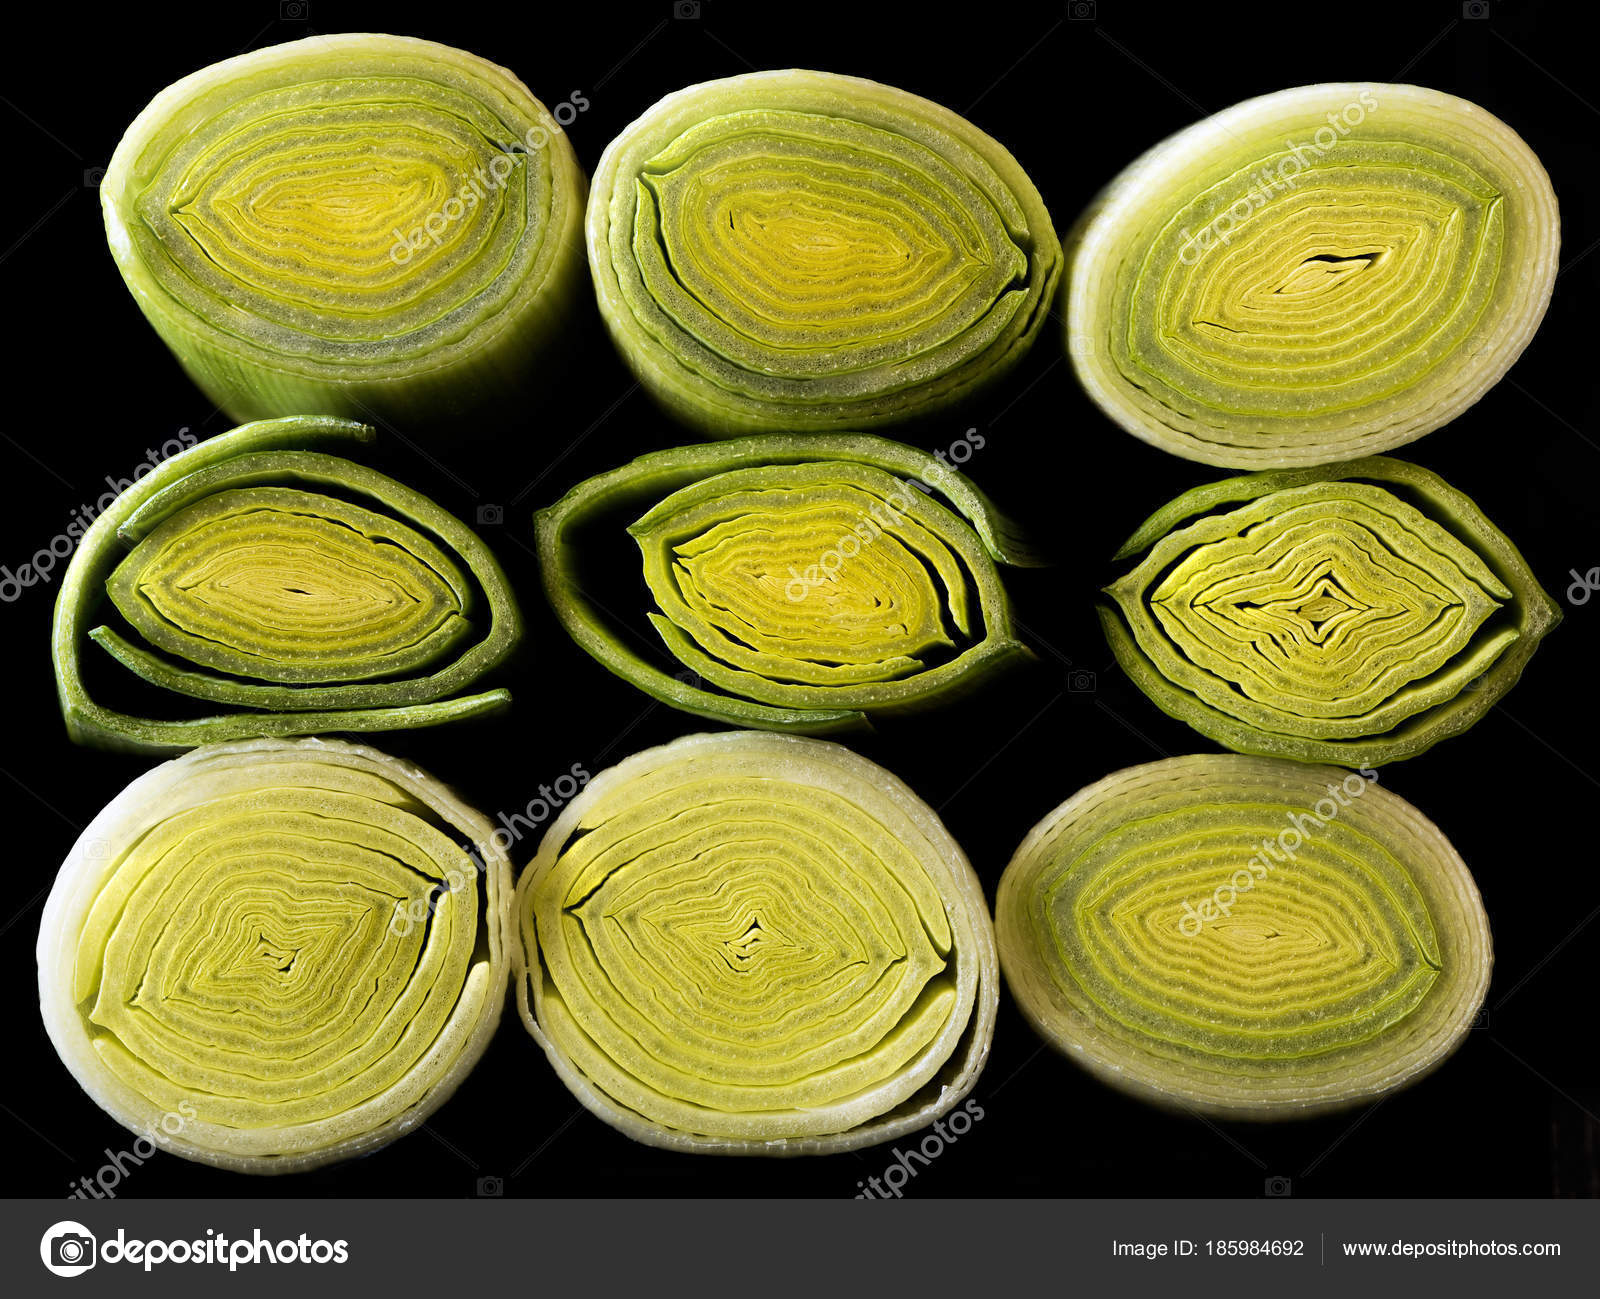 Cross-section of leek stem and leaves. — Stock Photo © Nazzu #185984692